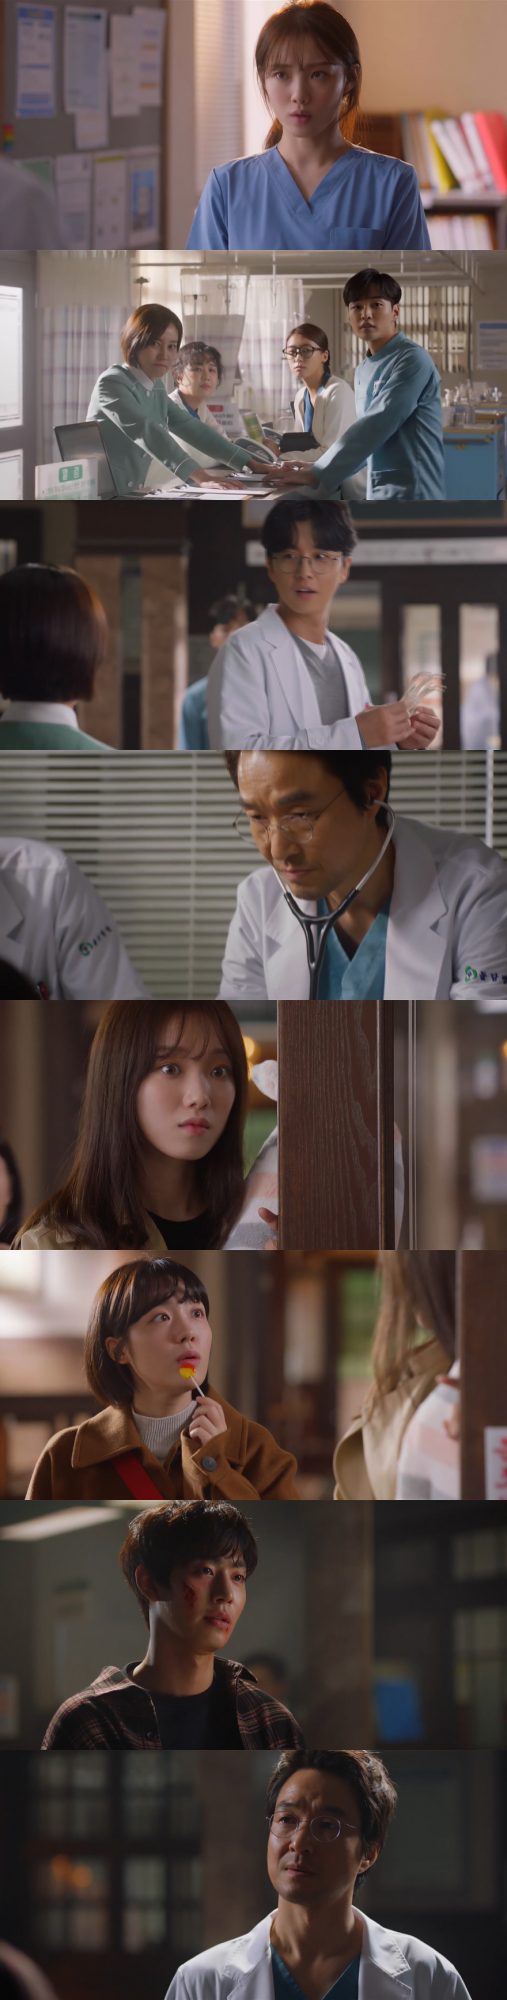 SBSs Romantic Doctor Kim Sabu returned to season 2 after three years, and Kim Sabu (Han Suk-kyu), who showed his mission as a doctor and the romance of seclusion with his whole body, remained the same.The characters who joined the new season, Ahn Hyo-seop, Lee Sung-kyung, Shin Dong-wook and So Ju-yeon, stimulated the curiosity about what story they would have.The behind-the-scenes story related to Kim Sabu, who injured his wrist in Season 1, is also expected to be revealed.The first episode of Romantic Doctor Kim Sabu 2 was broadcast on the 6th.The process of Seo Woo Jin (Ahn Hyo-seop), Cha Eun-jae (Lee Sung-kyung) and Yoon A-rum (Sho Ju-yeon) coming to Doldam Hospital was introduced.Young doctors Kang Dong-ju (Yoo Yeon-seok), Yoon Seo-jung (Seo Hyun-jin), and Do In-bum (Yang Se-jong), who worked at Doldam Hospital, left the hospital for public health work, overseas training, and return to the hospital.Kim, who had been working for several months, went to the main hospital of Geosan University Hospital to urge the recruitment of personnel.In the seminar room of the hospital, there was a demonstration of surgery by Professor Park Min-guk (Kim Joo-heon) through the screen.When an emergency occurred during the operation, Kim asked Cha Eun-jae, who was sitting in the front seat, to deliver something to the operating room by handing something down.Thanks to Kim Sabu, the emergency situation was completed, and Cha Eun-jae admired the ability of the person who handed him the note and wondered about the identity.After that, Kim Sabu neatly organized the emergency room where emergency patients followed. Yoon, who majored in emergency medicine, admired Kim Sabus appearance in the fourth year.Seo Woo Jin was shot with The Whistleblower at a hospital in Li Dian and bullied by colleagues.Since then, he has been working at Geosan University Hospital as a worker, but he is working part-time because he has difficulty in making a living.My colleagues at Geosan University Hospital did not like the Seo Woo Jin, who was The Whistleblower.Seo Woo Jin was furious at the words of a fellow fellow who was not working in a bar.Since then, Professor Park Min-guk has been asking Seo Woo Jin to quit as a doctor.Cha Eun-jae went into thoracic surgery and Seo Woo Jin went into surgery.In the operating room of Seo Woo Jin, a patient suffered a diaphragmatic bleeding, which required surgery and joint surgery, and Cha Eun-jae came in.Cha Eun-jae, who overdosed on a tranquilizer due to operating room swelling, fell asleep like a faint during surgery.Cha Eun-jae, who was disciplined, chose to work at Doldam Hospital during suspension and dispatch to Doldam Hospital.Kim, who learned about the situation of Seo Woo Jin, proposed a place for the surgery of the Doldam Hospital to Seo Woo Jin, who was leaving the office, and Seo Woo Jin came down to Doldam Hospital.Yoon Beautiful volunteered to dispatch a hospital to Doldam, while Kim Sabus wonderful side was his doctor. Do Yoon-wan (Choi Jin-ho), who left the hospital in disgrace, returned to the chairman of Doldam Hospital.Romantic Doctor Kim Sabu 2 created tension and curiosity as existing characters and new characters mix appropriately.In Season 1, the conflict between Kim Sabu and Do Yoon-wan was maximized, and this time, the confrontation between Kim Sabu and Park Min-guk, who will be appointed as vice president of Doldam Hospital, is expected to be more dramatic.In addition, young blood such as Ahn Hyo-seop, Lee Sung-kyung, Soju Yeon, Shin Dong-wook energized the drama.However, Lee Sung-kyung and Ahn Hyo-seop were evaluated as lacking acting ability or box office performance compared to Seo Hyun-jin and Yoo Yeon-seok of Season 1.However, as the characters in the play grow, there were many viewers who expected that the two characters expressions would become more natural.Ahn Hyo-seop and Lee Sung-kyung are rivals in the play, but they are also intertwined with romance lines. From the beginning, the opinions of viewers were divided in the foreshadowed romance.It was able to attract existing viewers who missed Romantic Doctor Kim Sabu while continuing the unique atmosphere of Season 1 to Season 2.However, the heroine with the swelling, the male protagonist who is chased by the Ushijima the Loan Shark vendors, was somewhat disappointing because it was a setting that I had seen many in Li Dian.Seo Woo Jin, who was beaten by Ushijima the Loan Shark vendors, came to Doldam Hospital with a scarred face and said to Kim Sabu, Do you want a job?I need money. How much can you give me? The childish ambassador also disturbed the atmosphere of the drama.